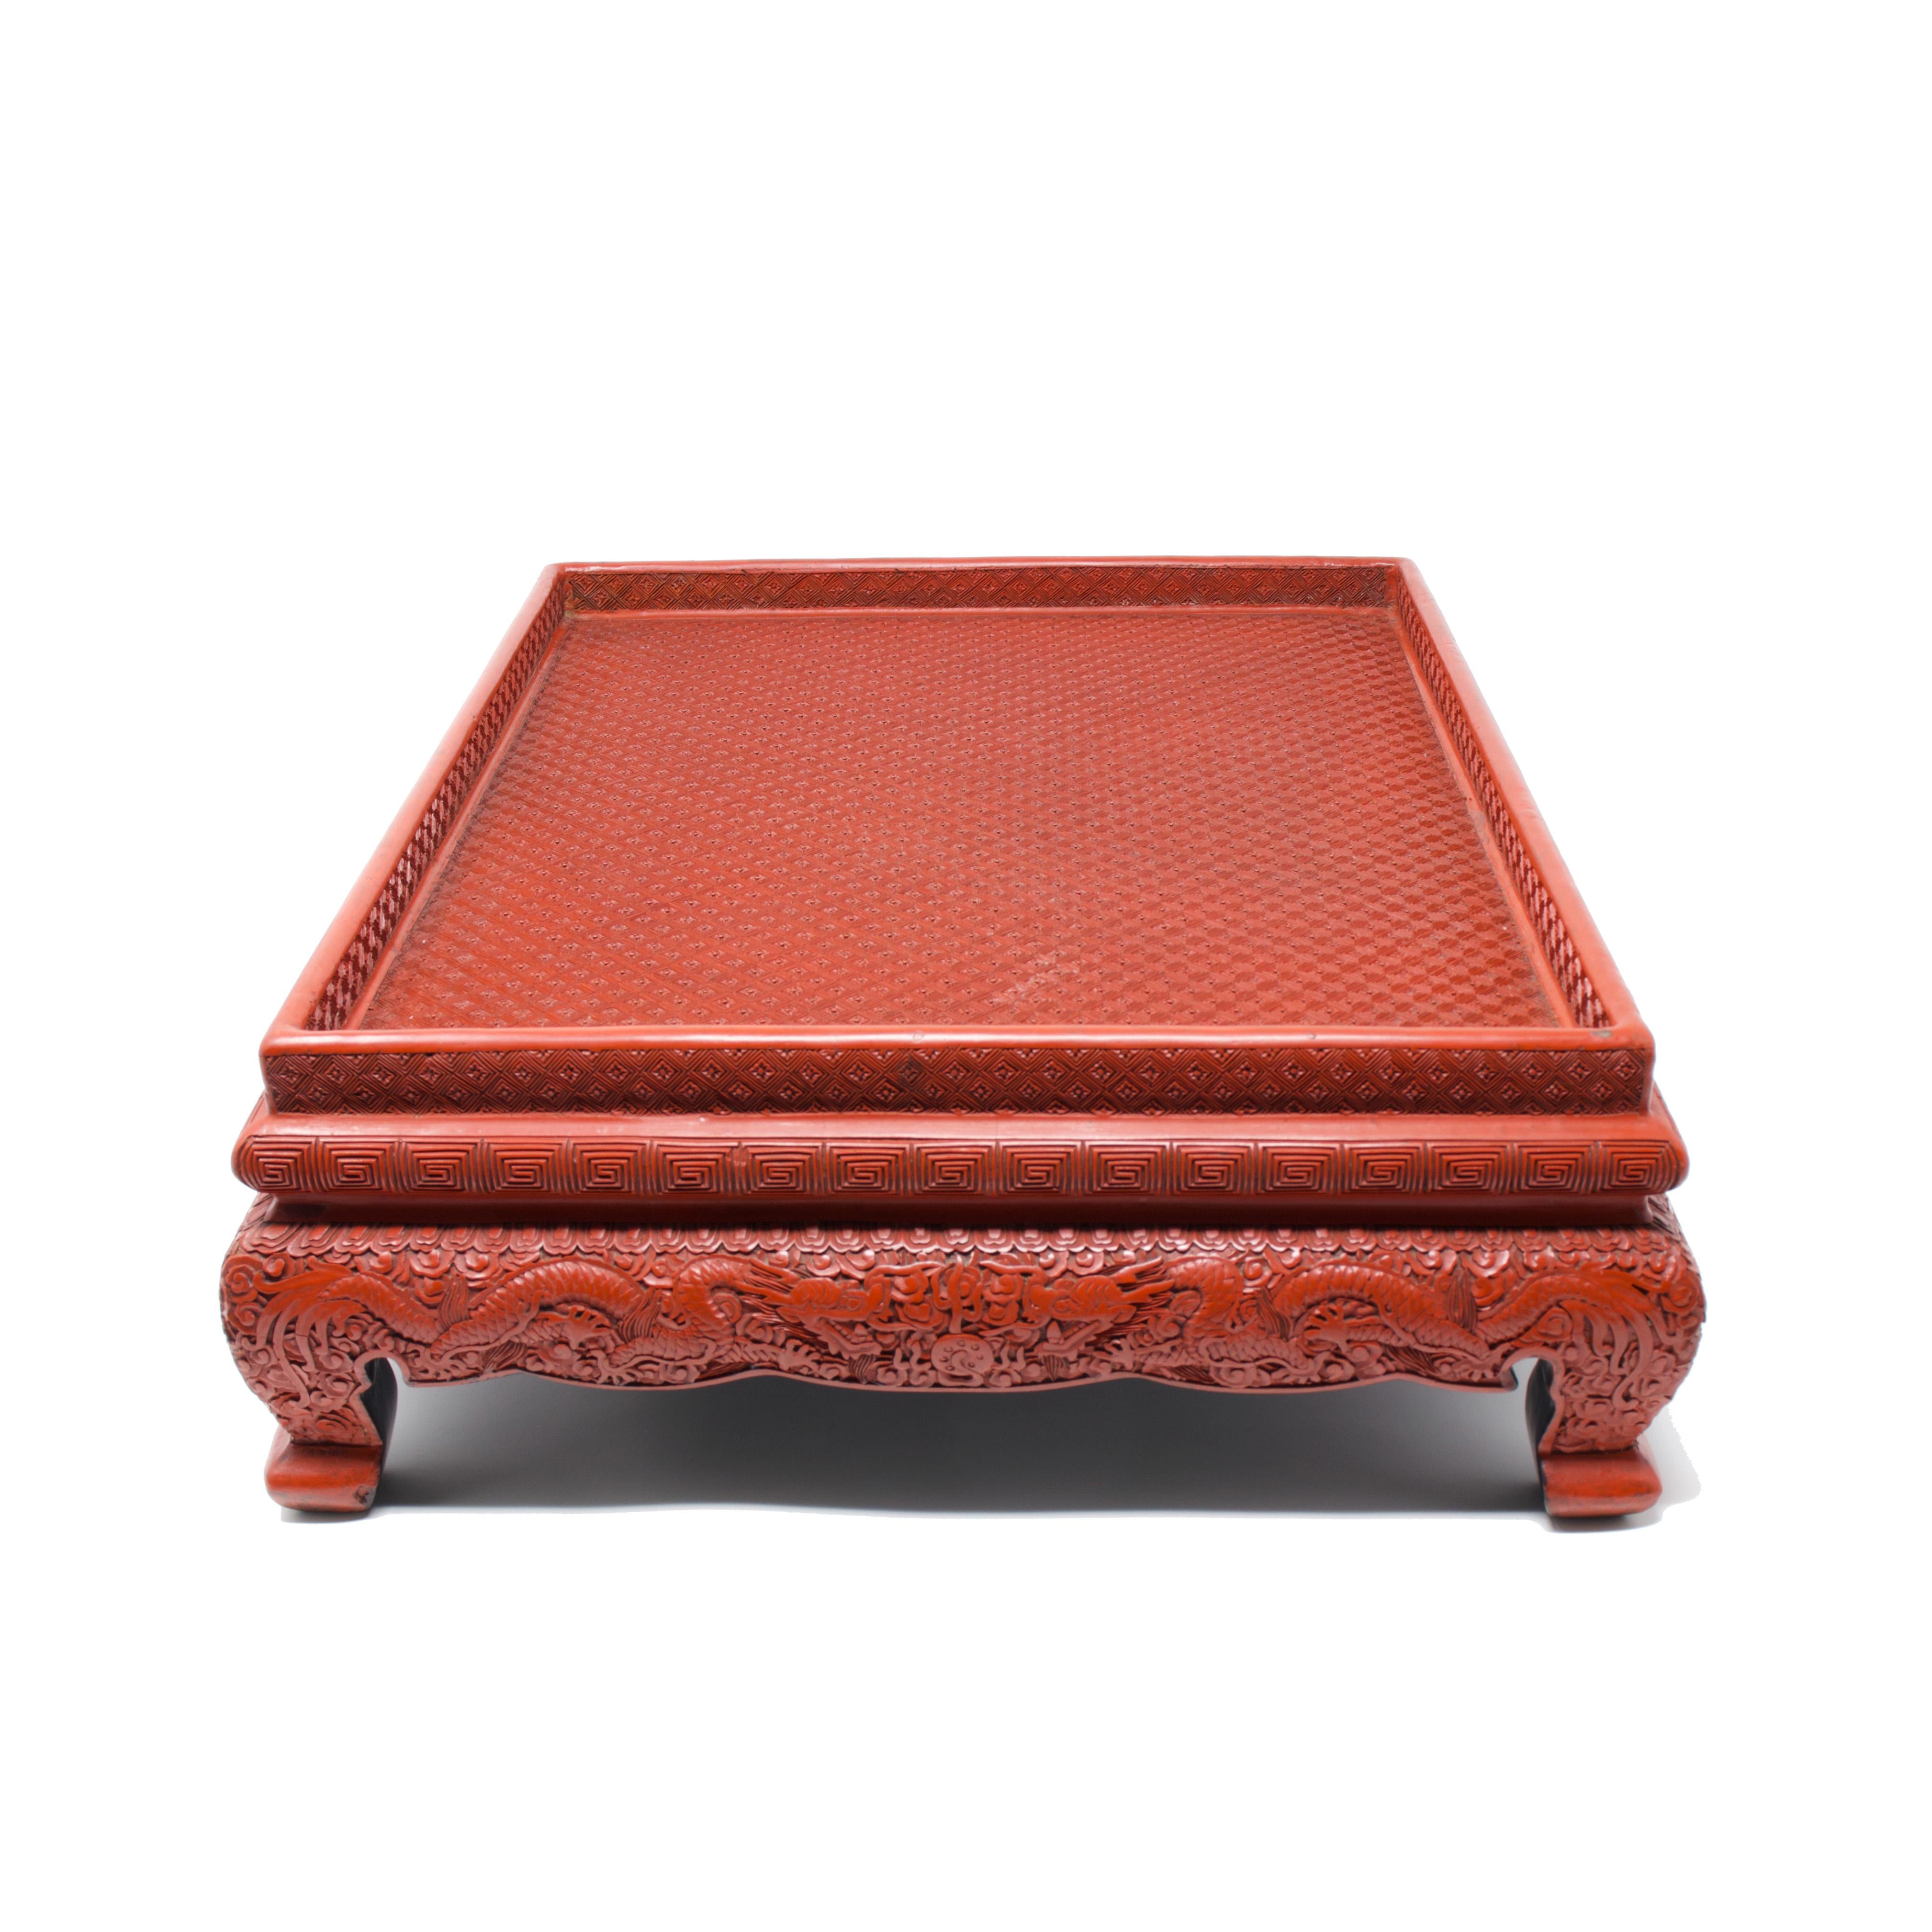 Antique Chinese Cinnabar Lacquer Tray/Stand with Dragon Design In Good Condition For Sale In Point Richmond, CA